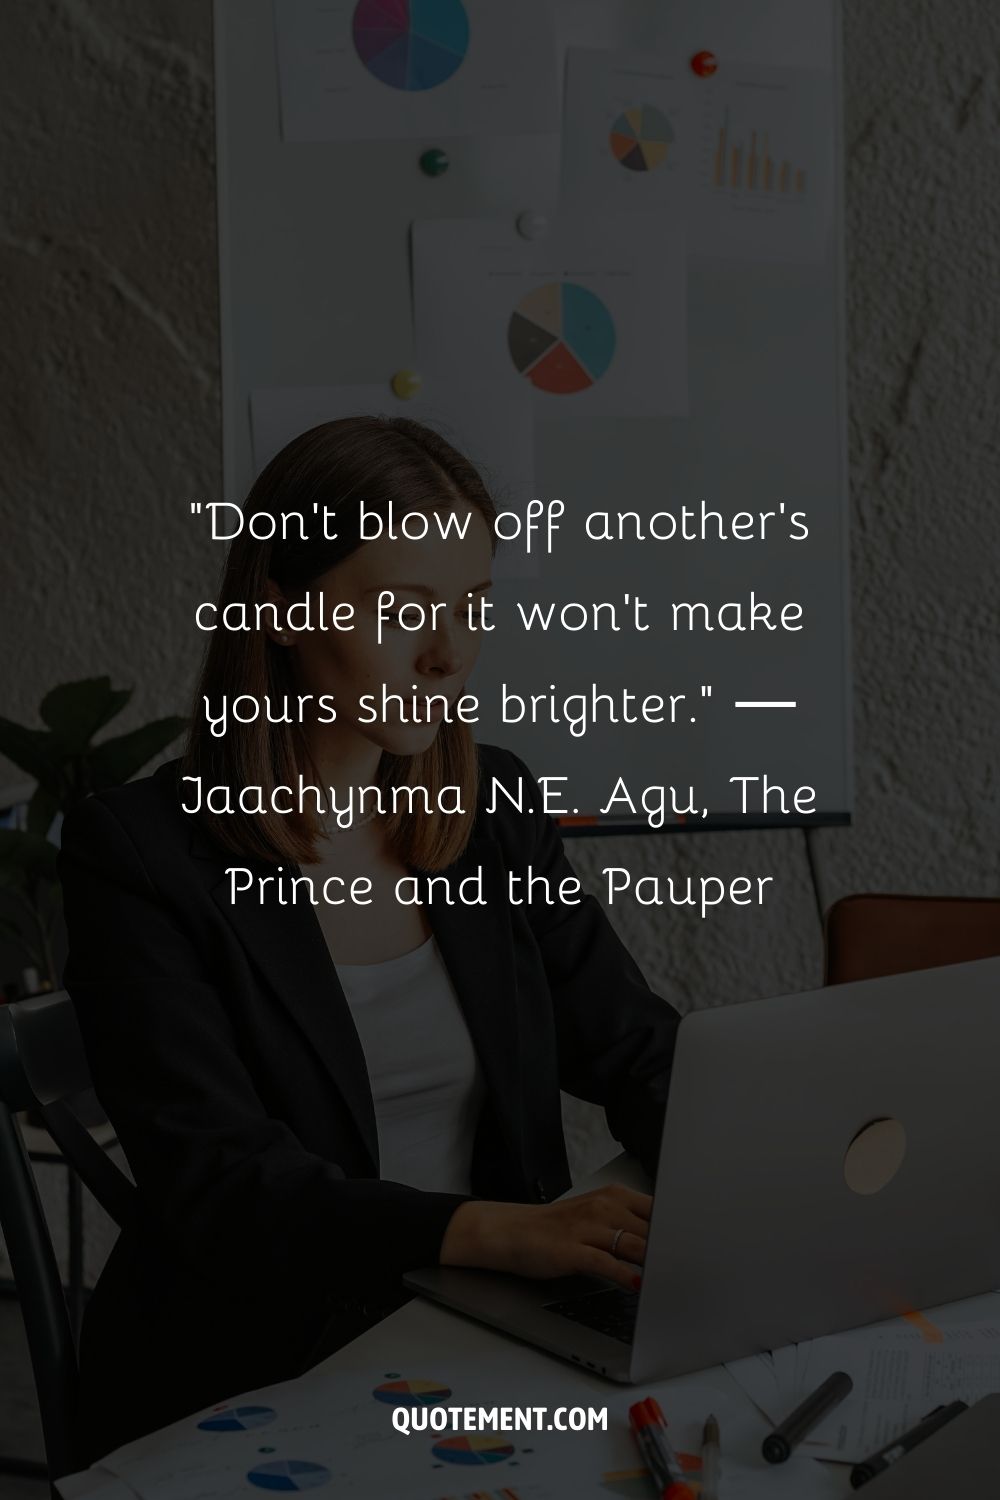 “Don't blow off another's candle for it won't make yours shine brighter.” ― Jaachynma N.E. Agu, The Prince and the Pauper